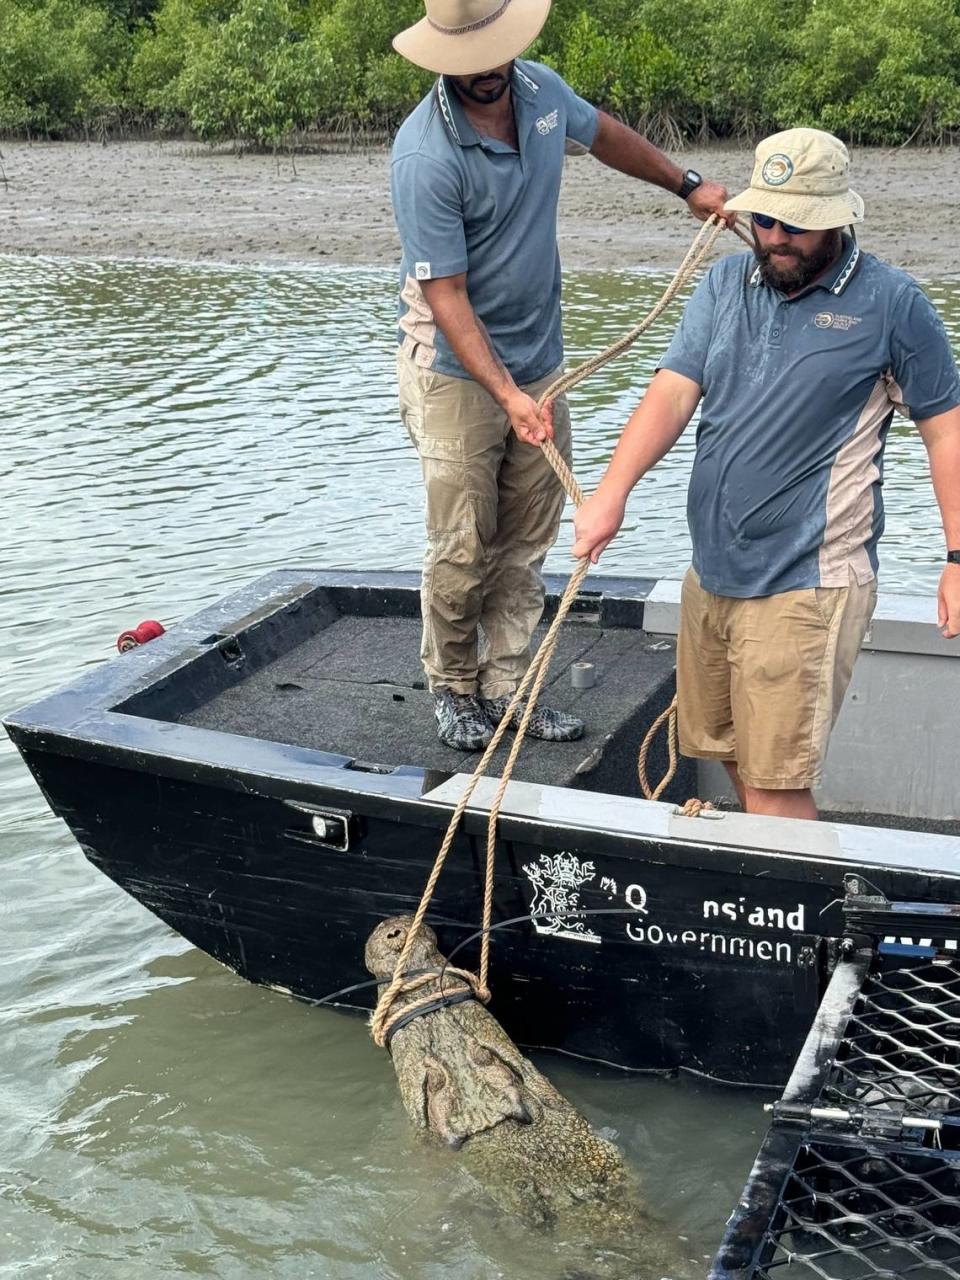 Wildlife officials captured the 13-foot-long crocodile in a marina of Cardwell.